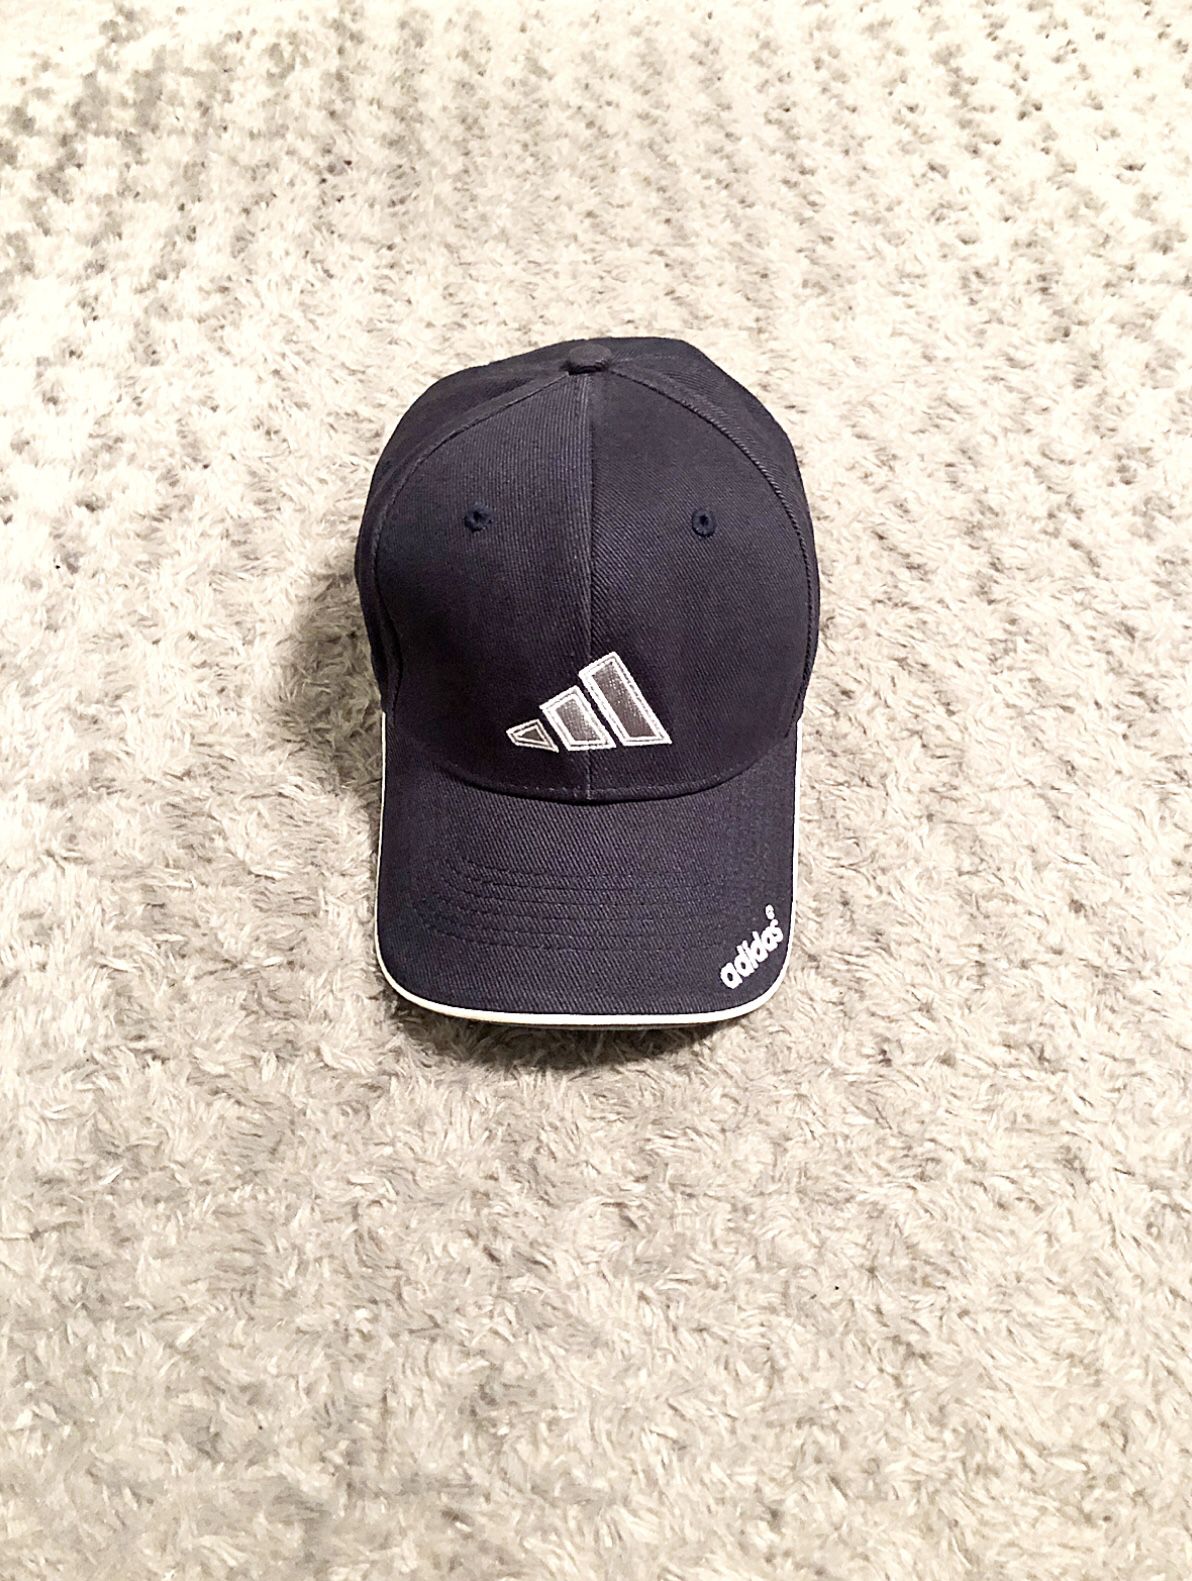 Men's Adidas classic cap paid $30 great condition! Navy blue, white Adidas text & logo embroidery